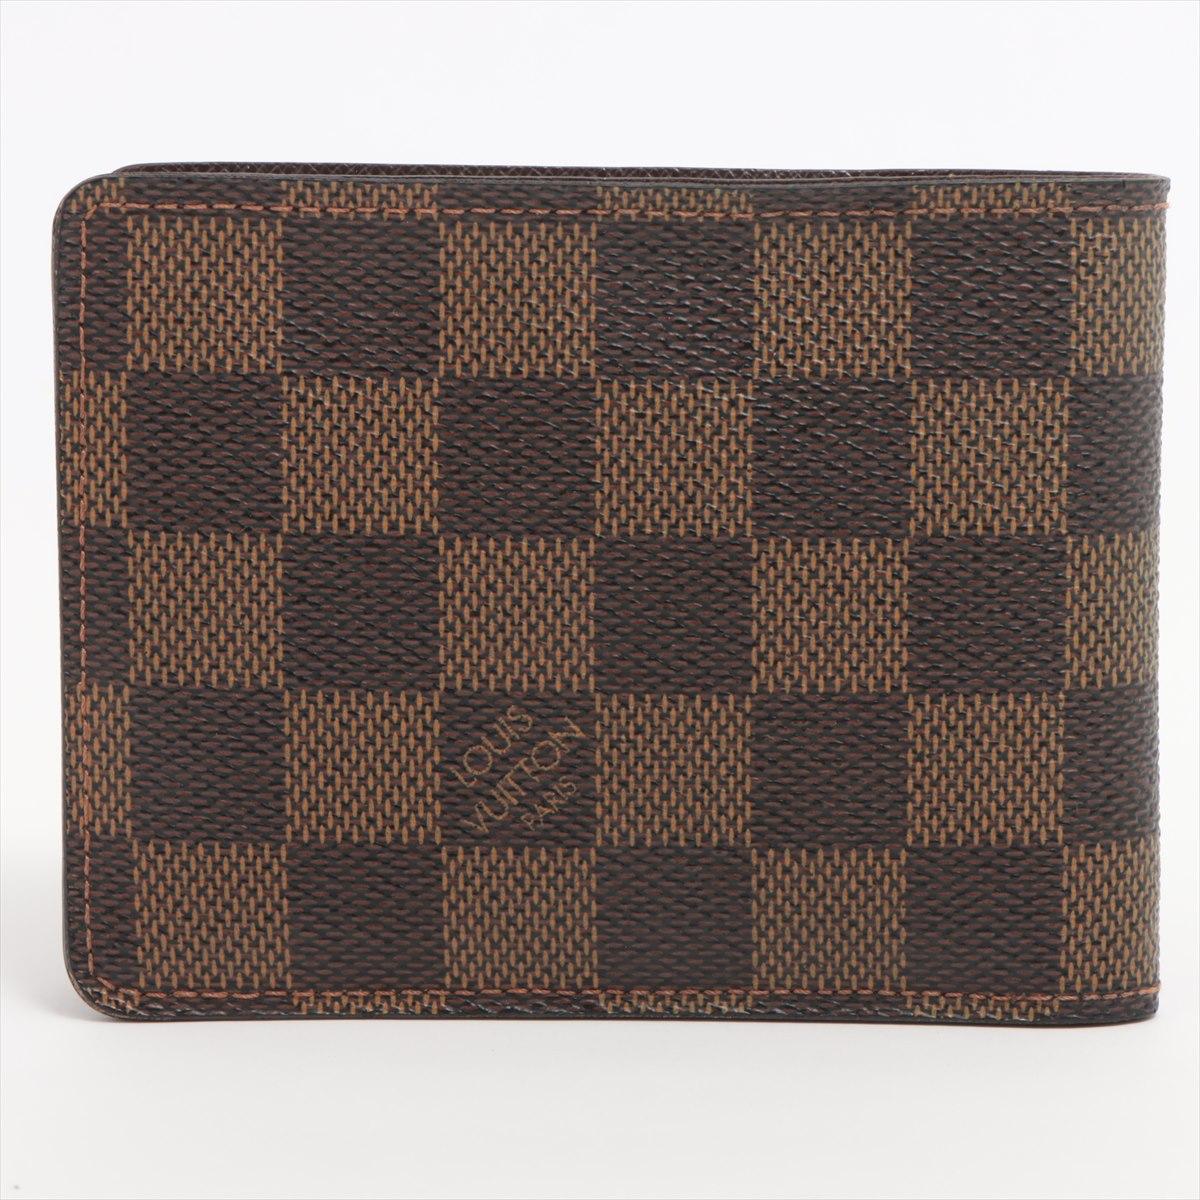 Louis Vuitton Damier Ebene Multiple Wallet In Good Condition For Sale In Indianapolis, IN